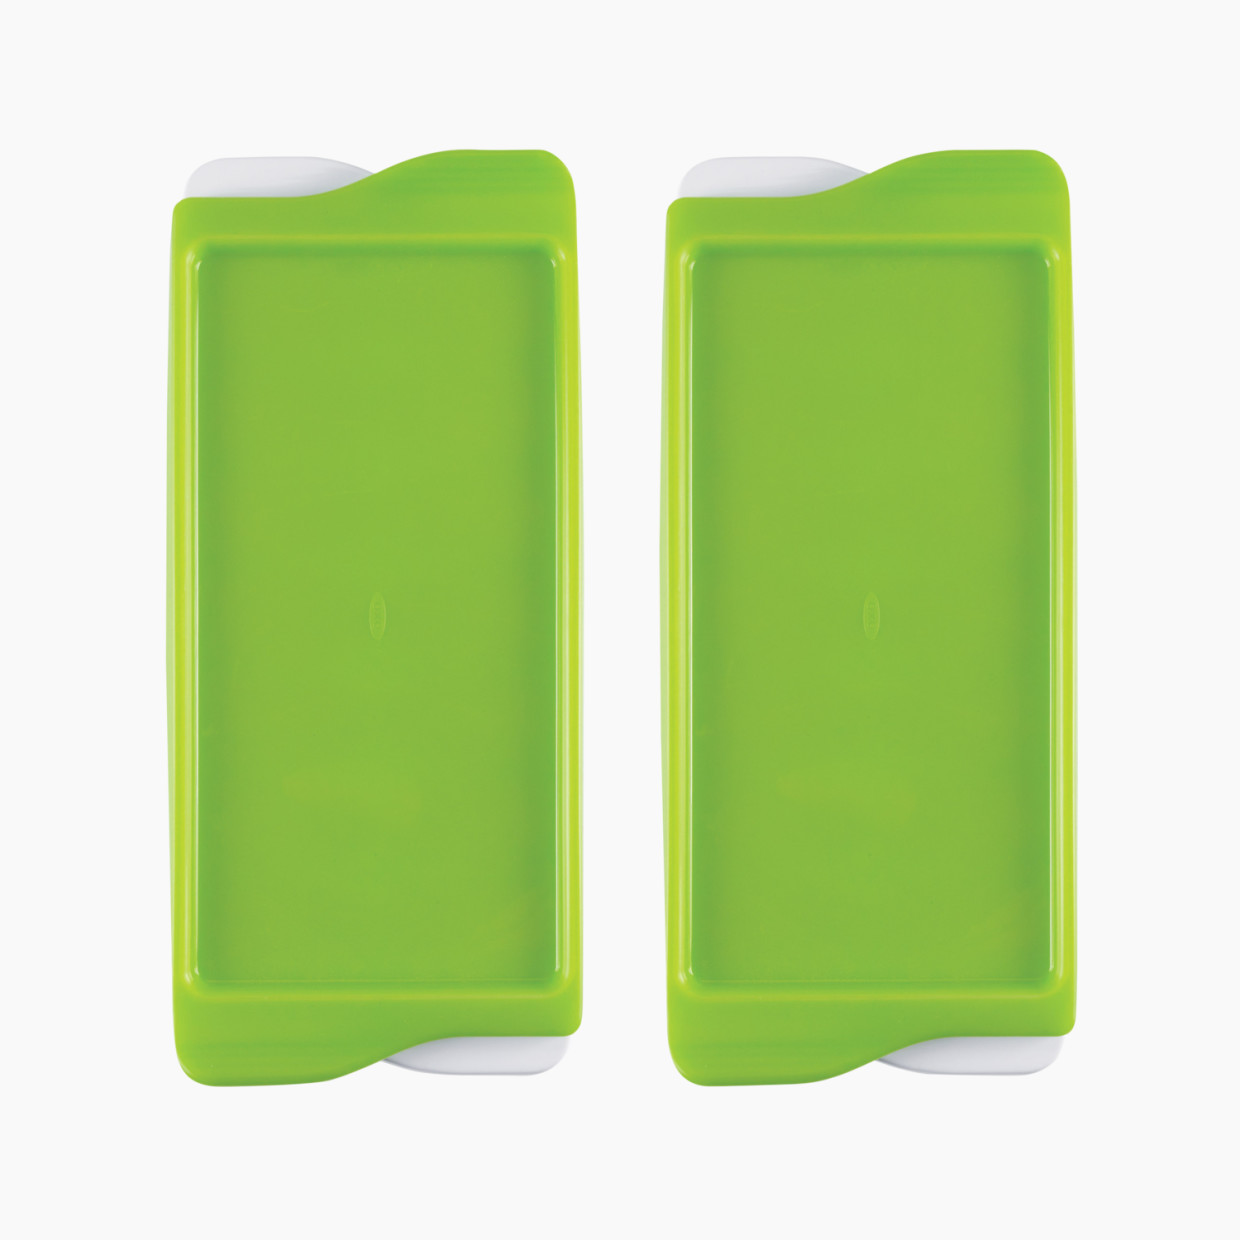 OXO Tot Baby Food Freezer Tray with Protective Cover - Green, 2.